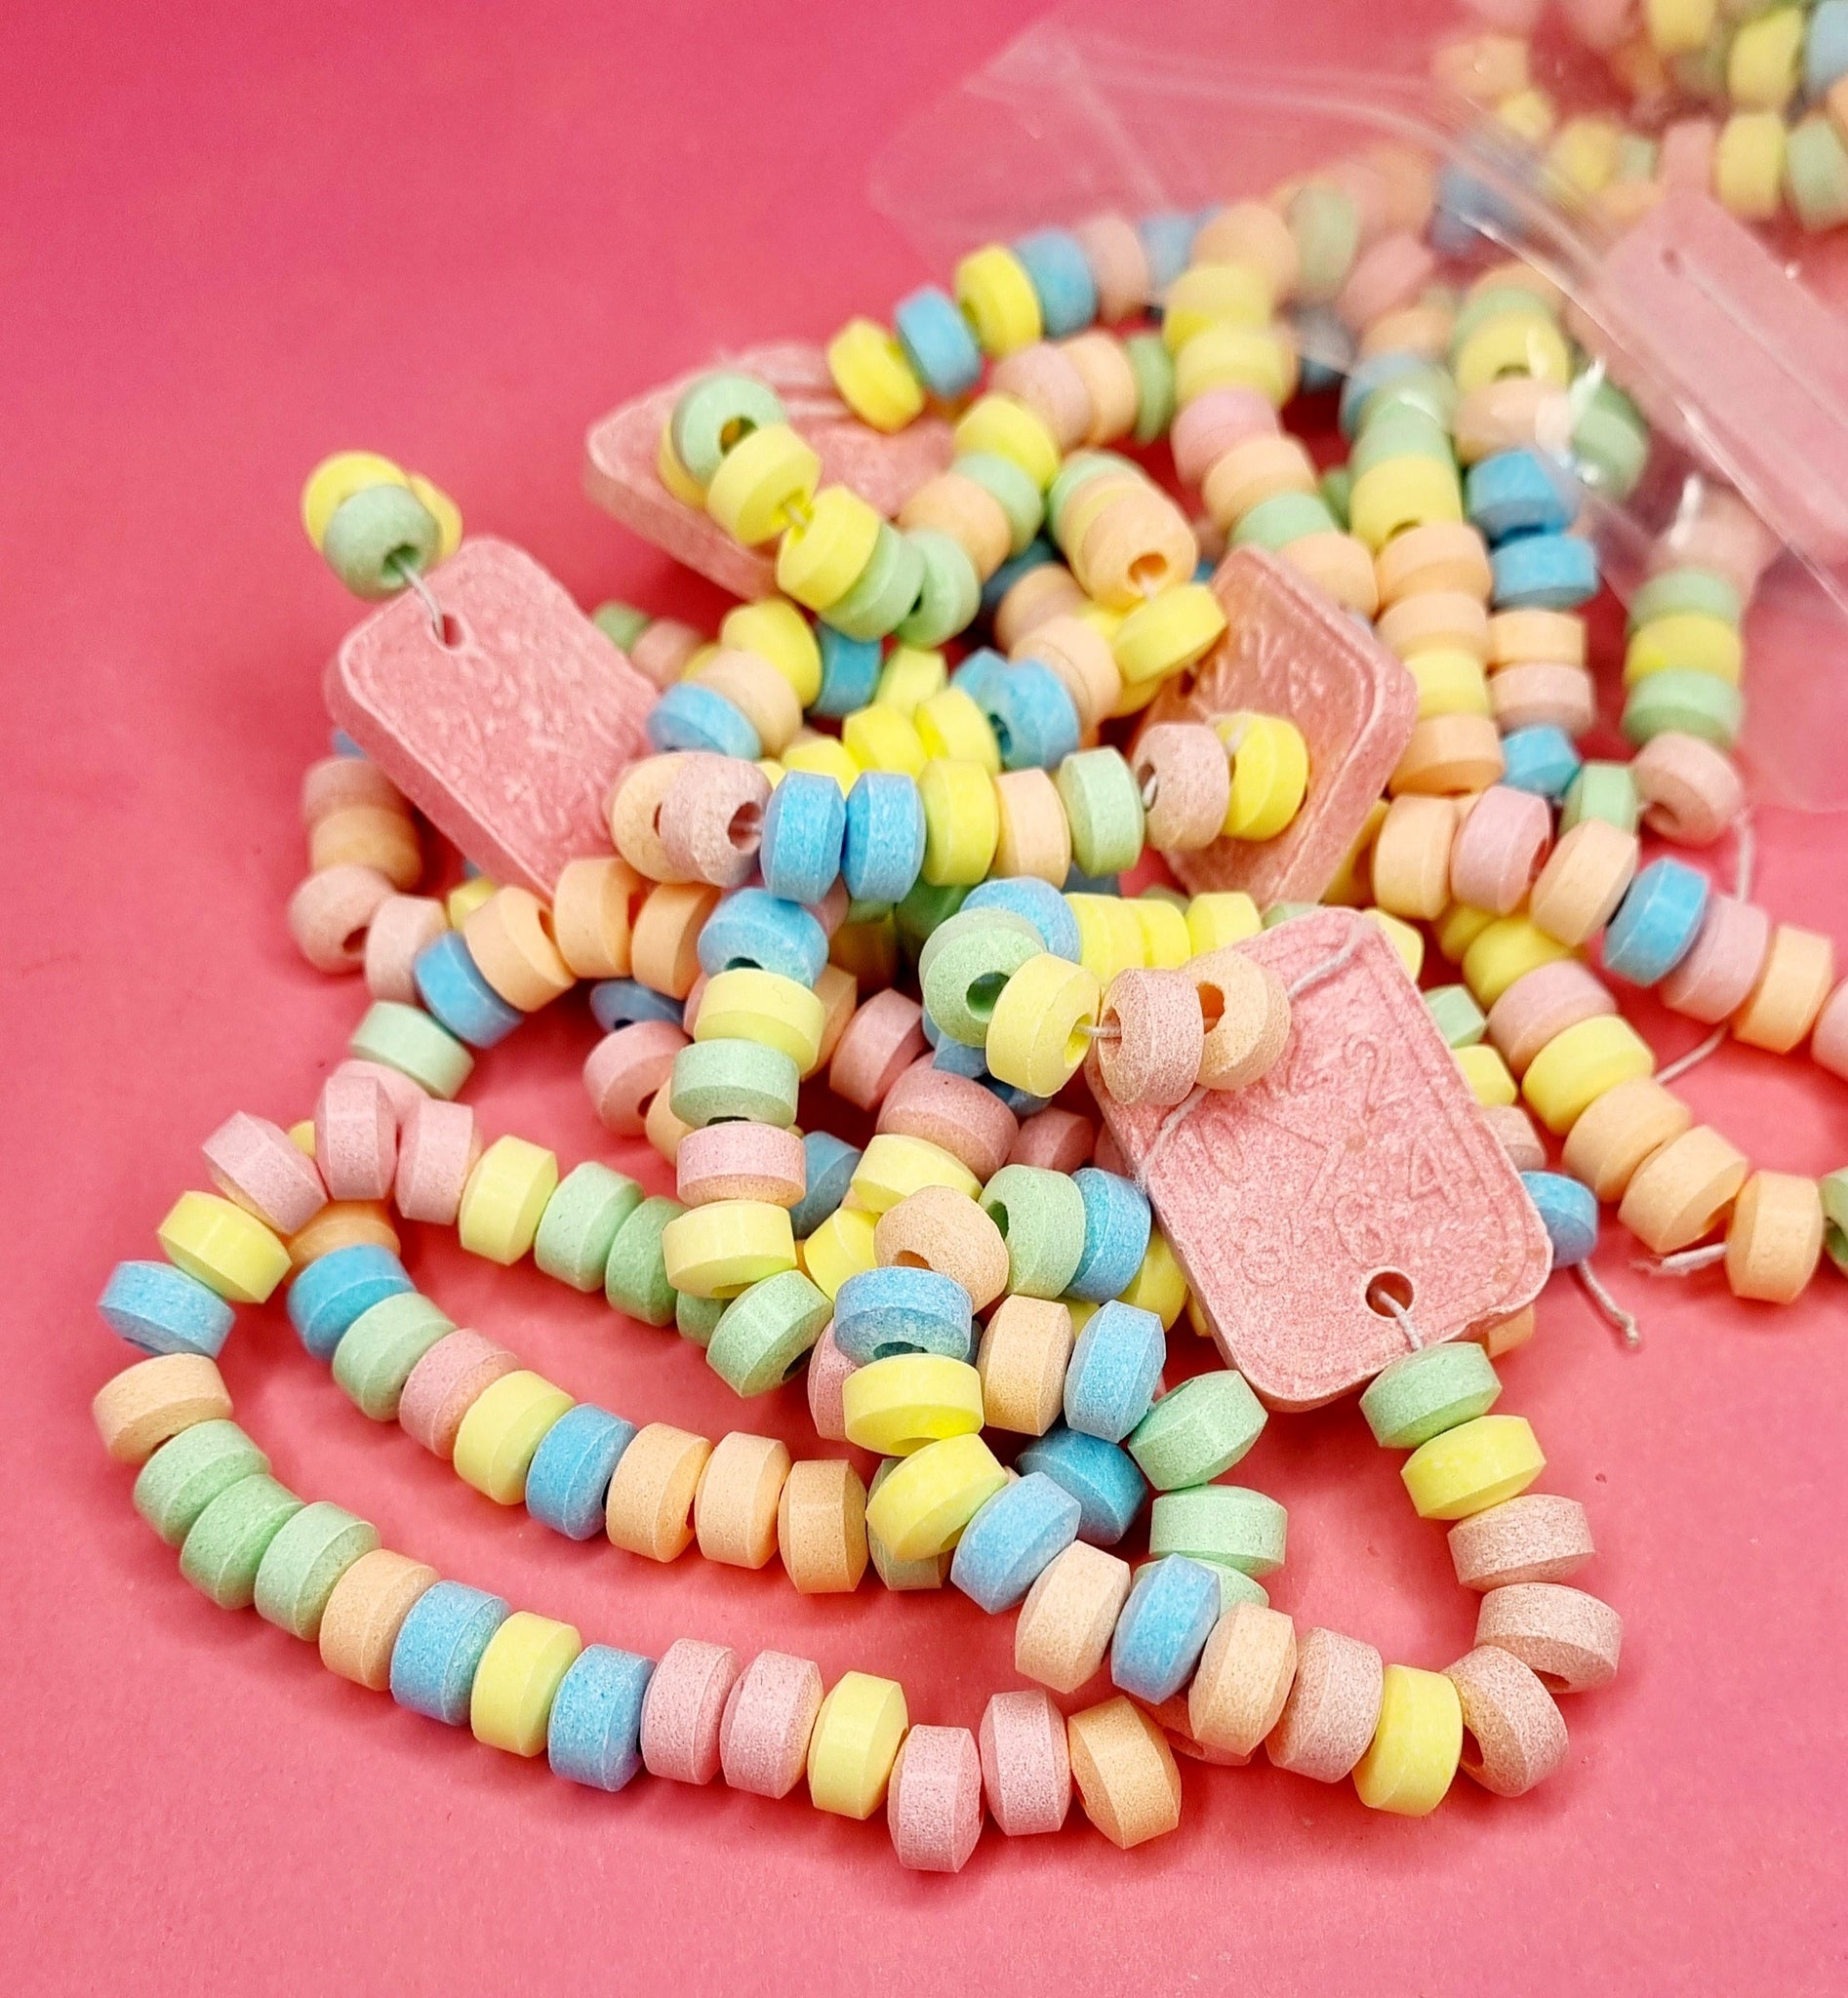 candy bracelets for Easter holiday candy| Alibaba.com